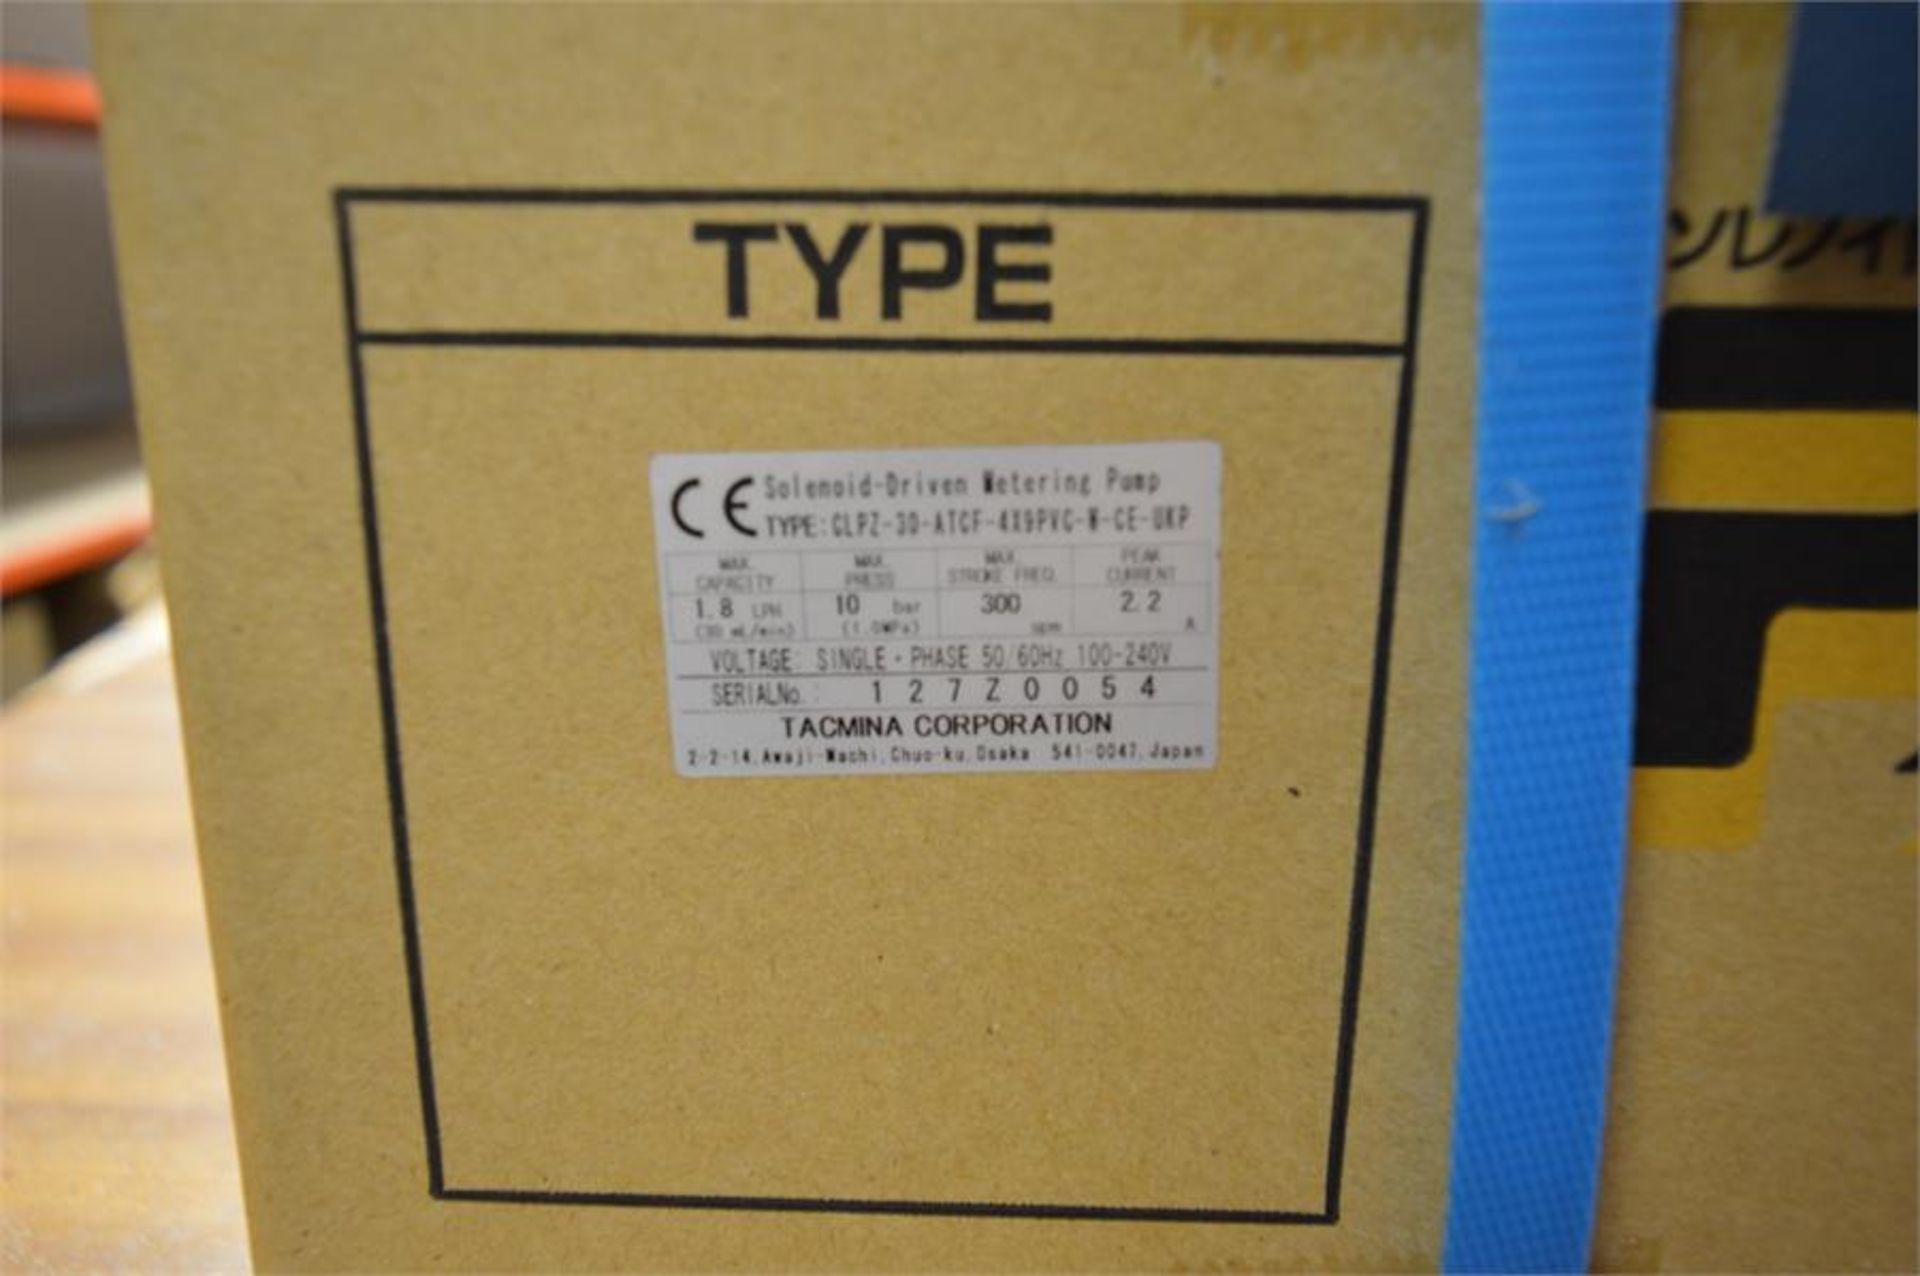 2 x Tacmina, CLPZ-30-ATCF-4X9PVC-W-CE-UKP, solenoid-driven metering pumps (boxed/unopened) - Image 2 of 2